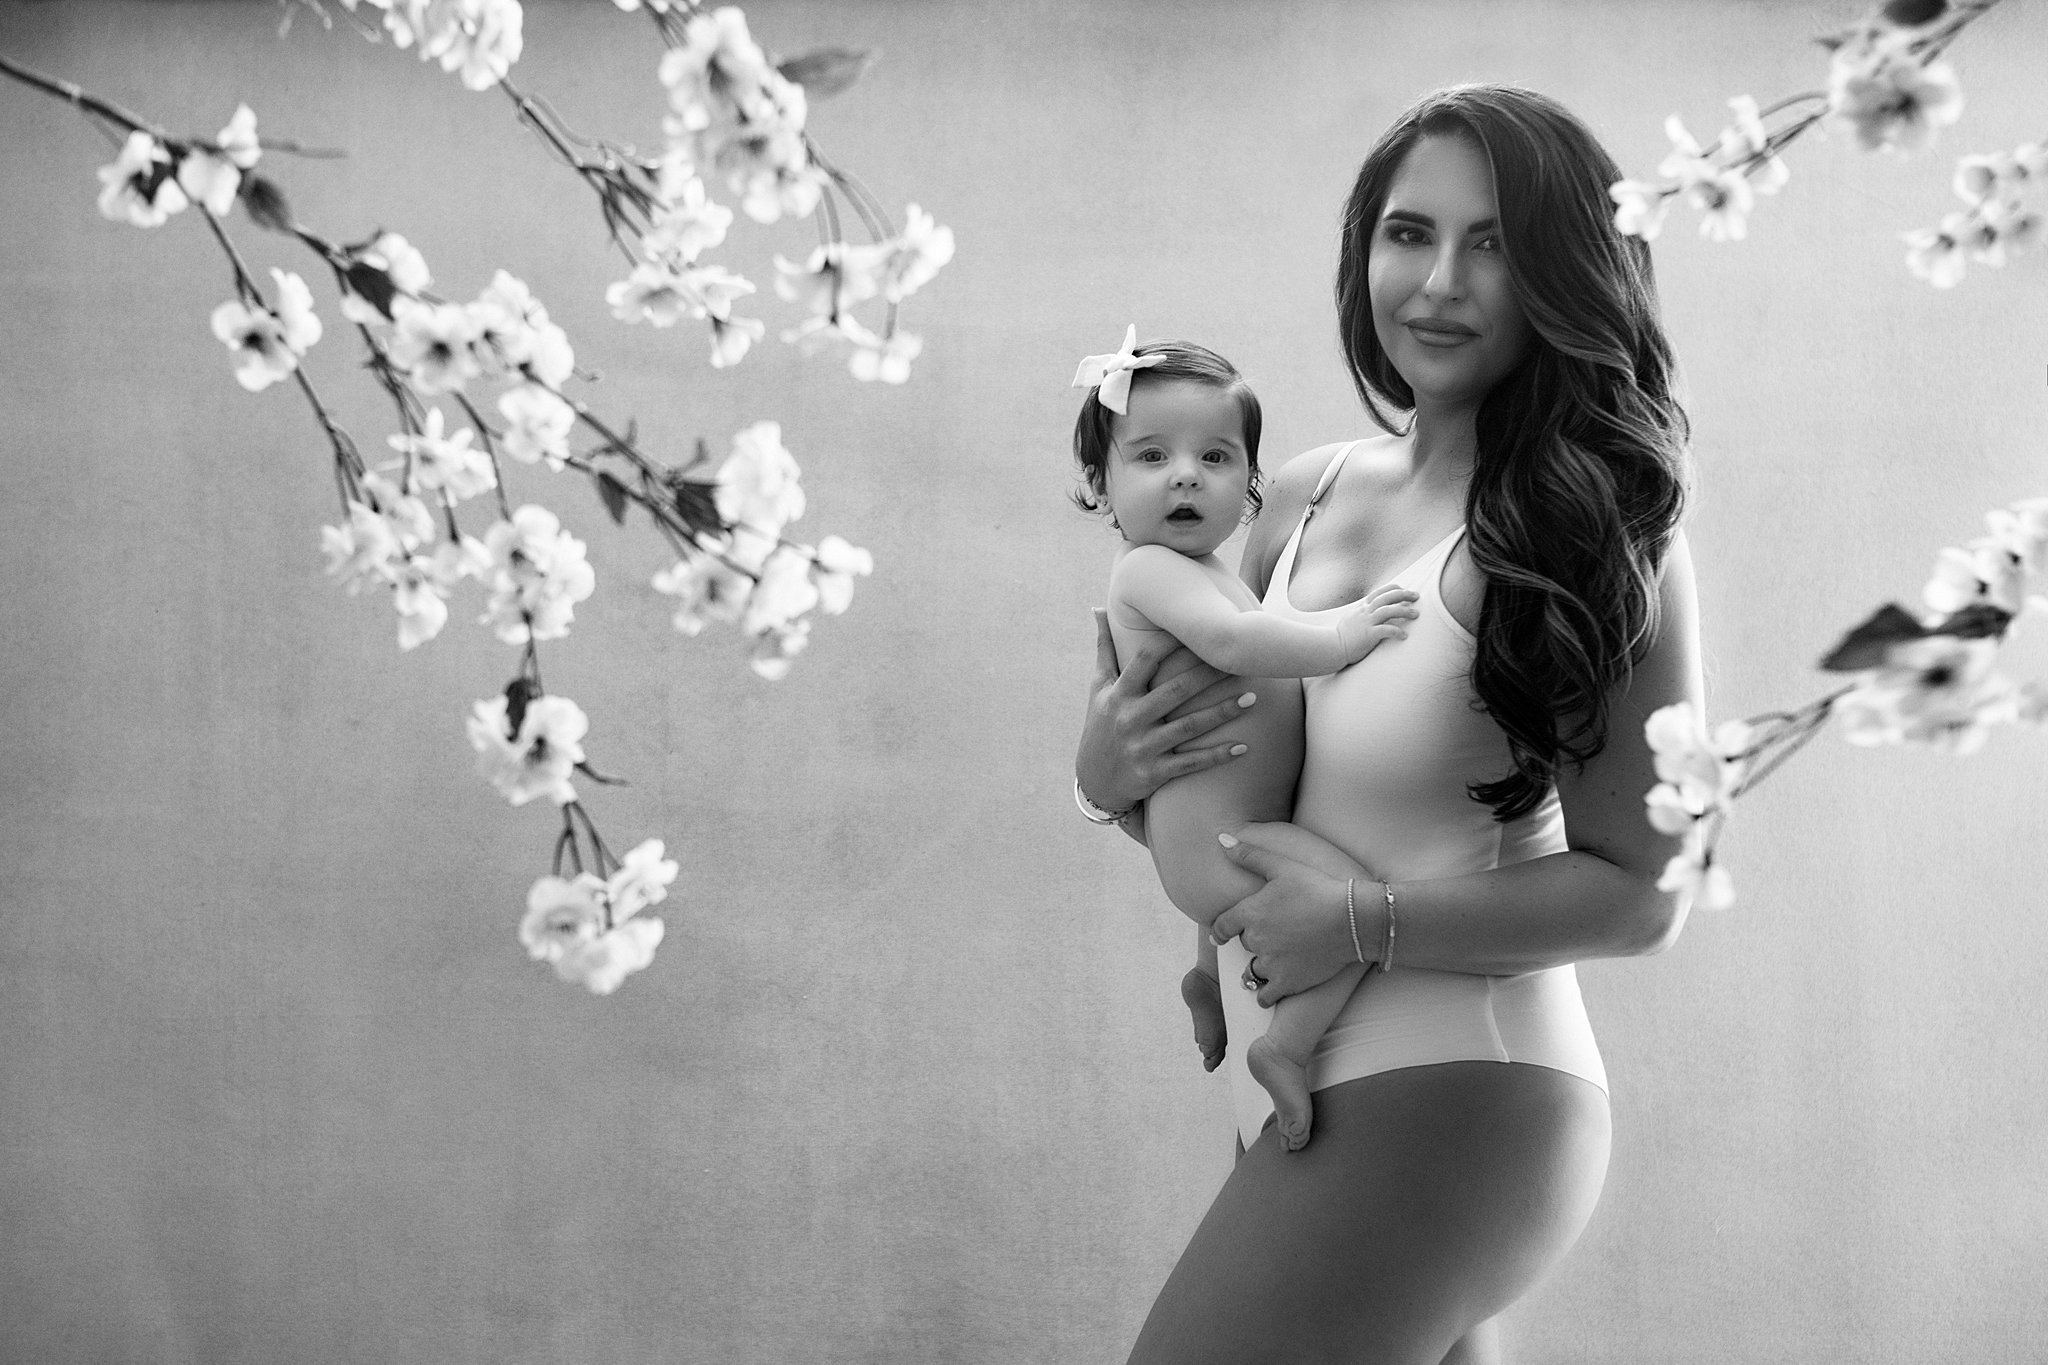 A woman in a white one piece suit holds her toddler baby girl while standing in front of some cherry blossoms in a studio